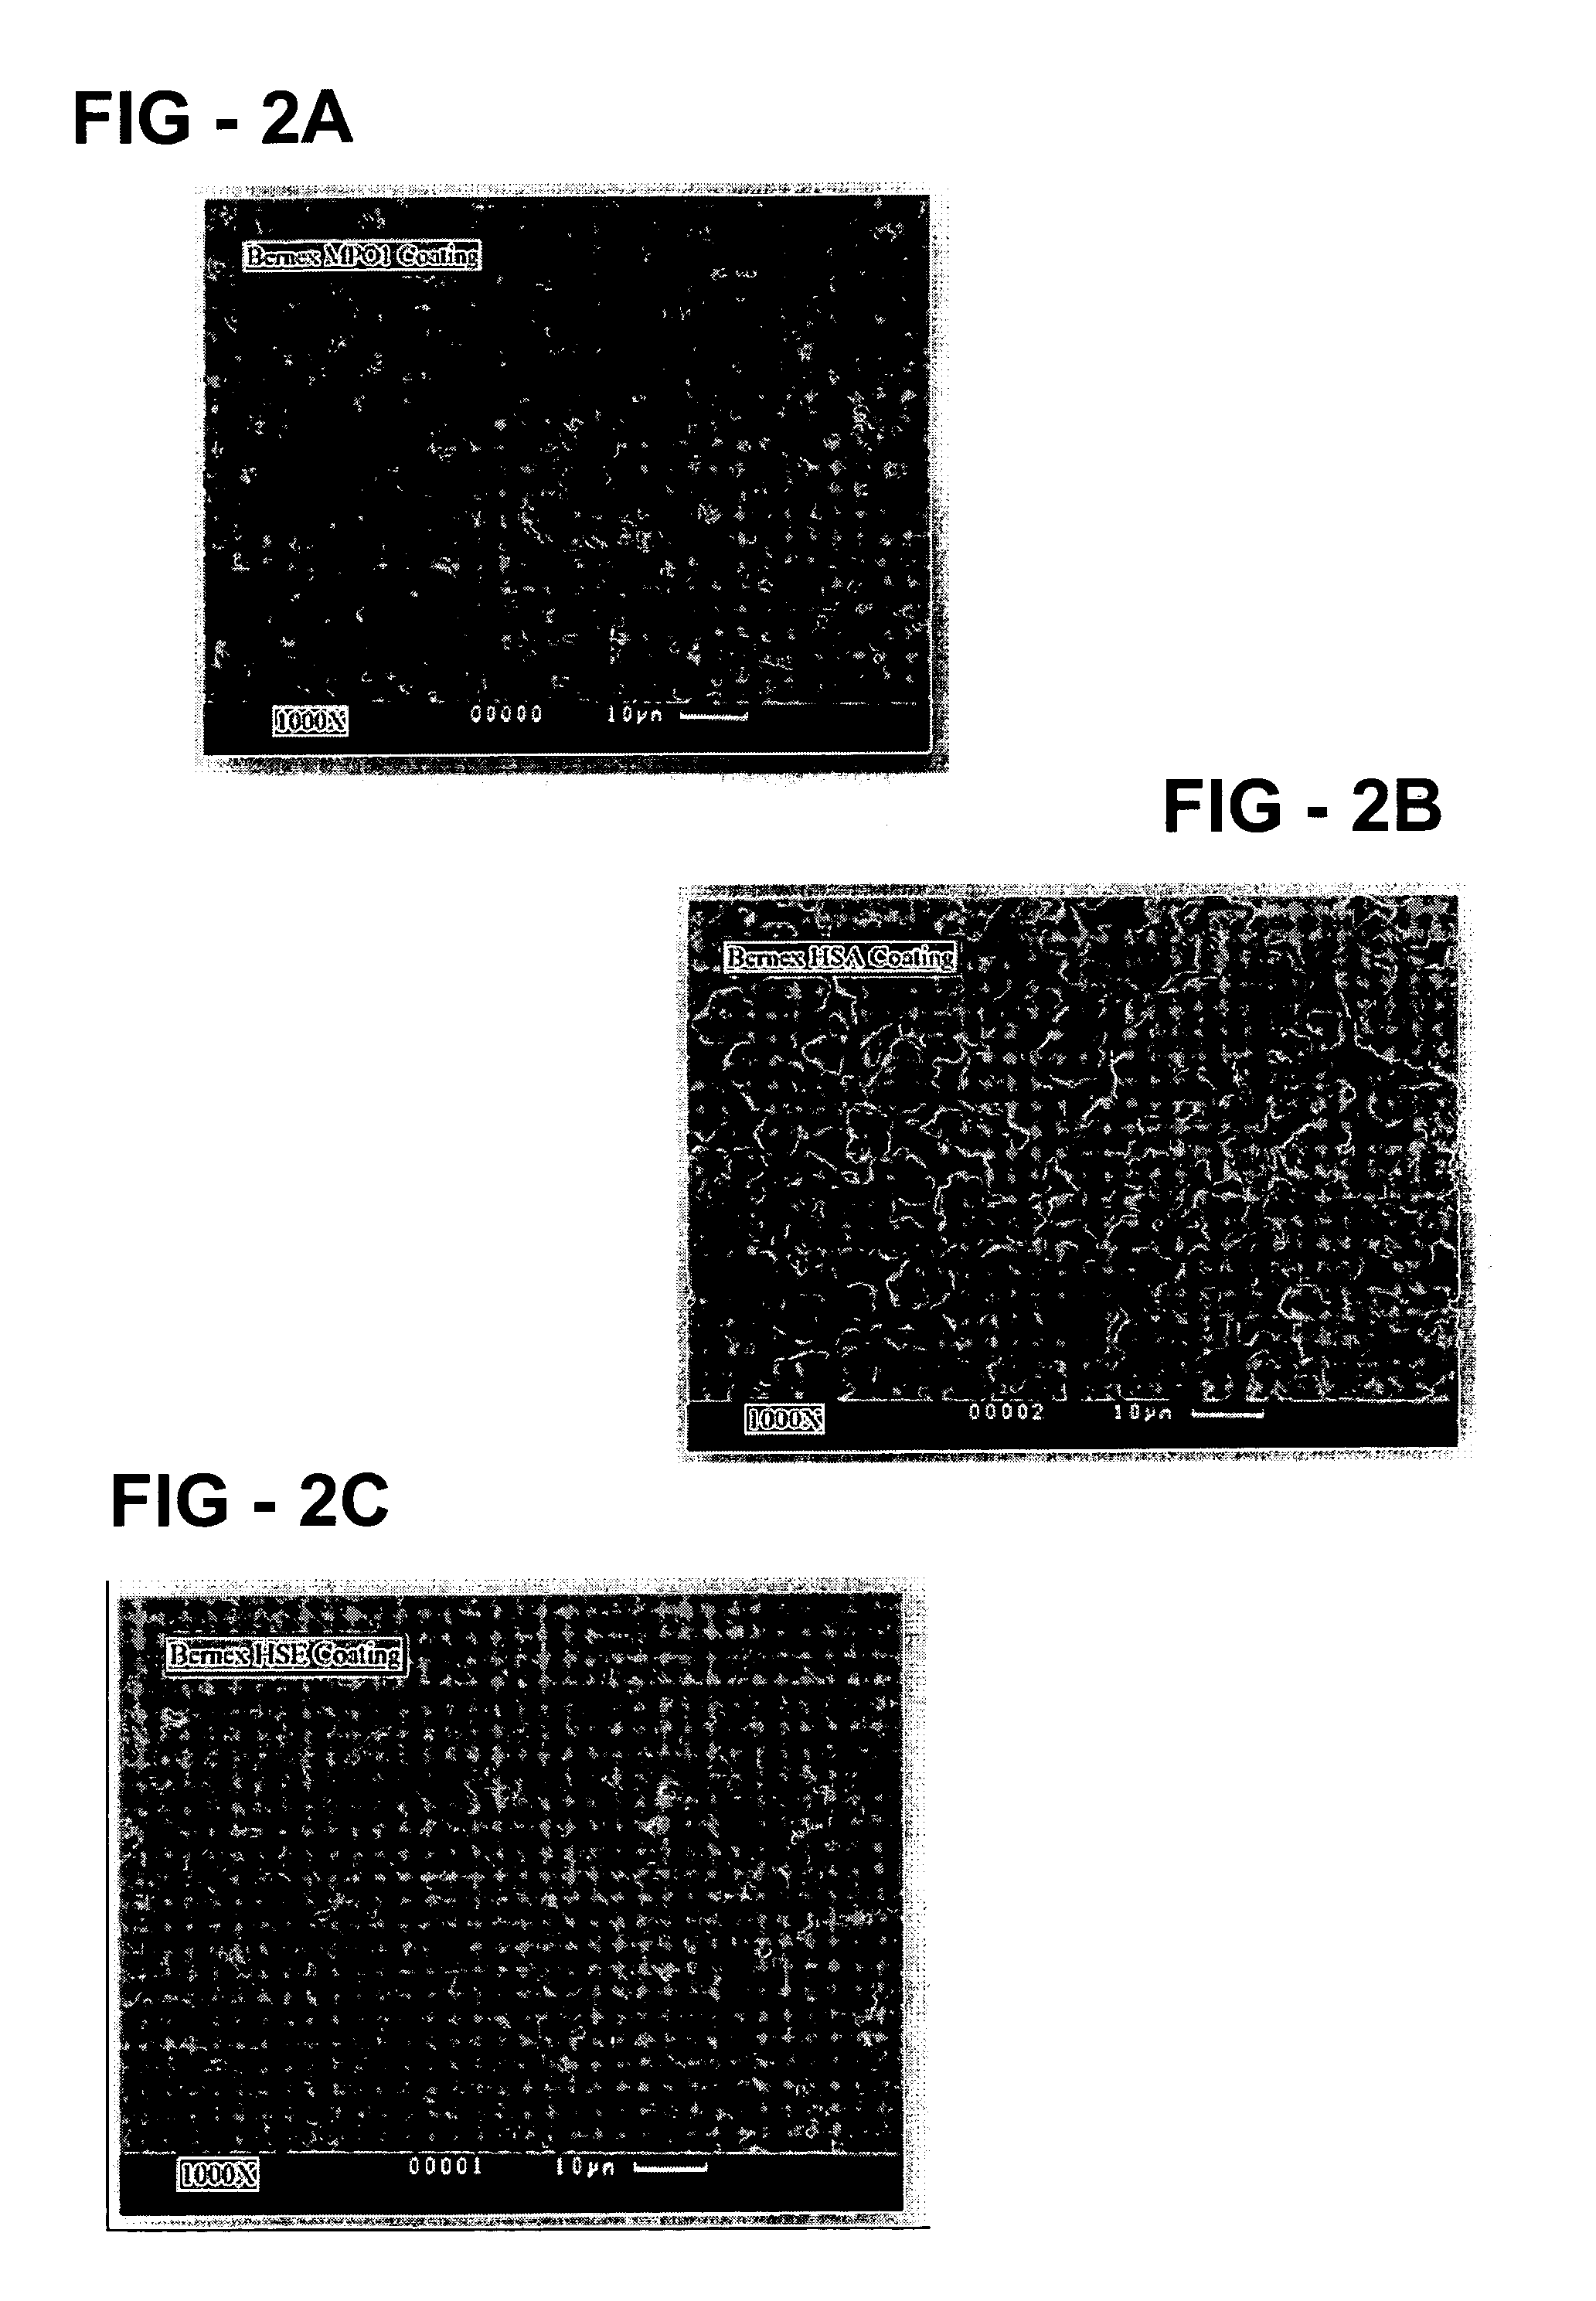 Dual layer diffusion bonded chemical vapor coating for medical implants